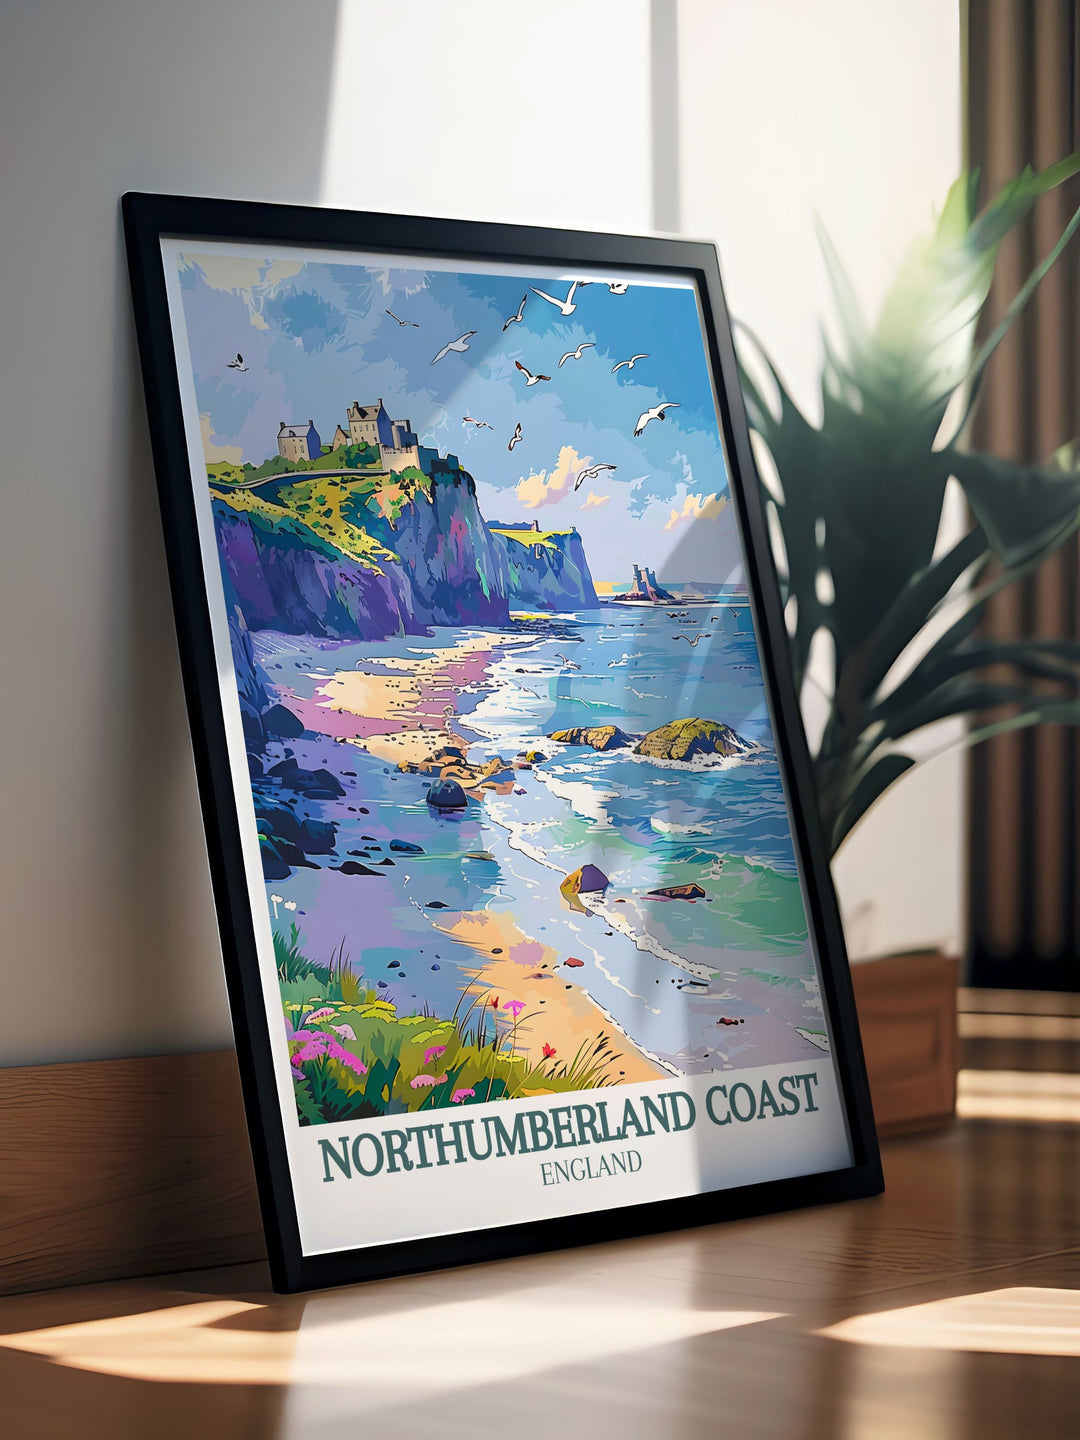 Vintage Travel Print showcasing the iconic Bamburgh Castle and Dunstanburgh Castle along the stunning Northumberland Coast ideal for adding a touch of historical charm to any room